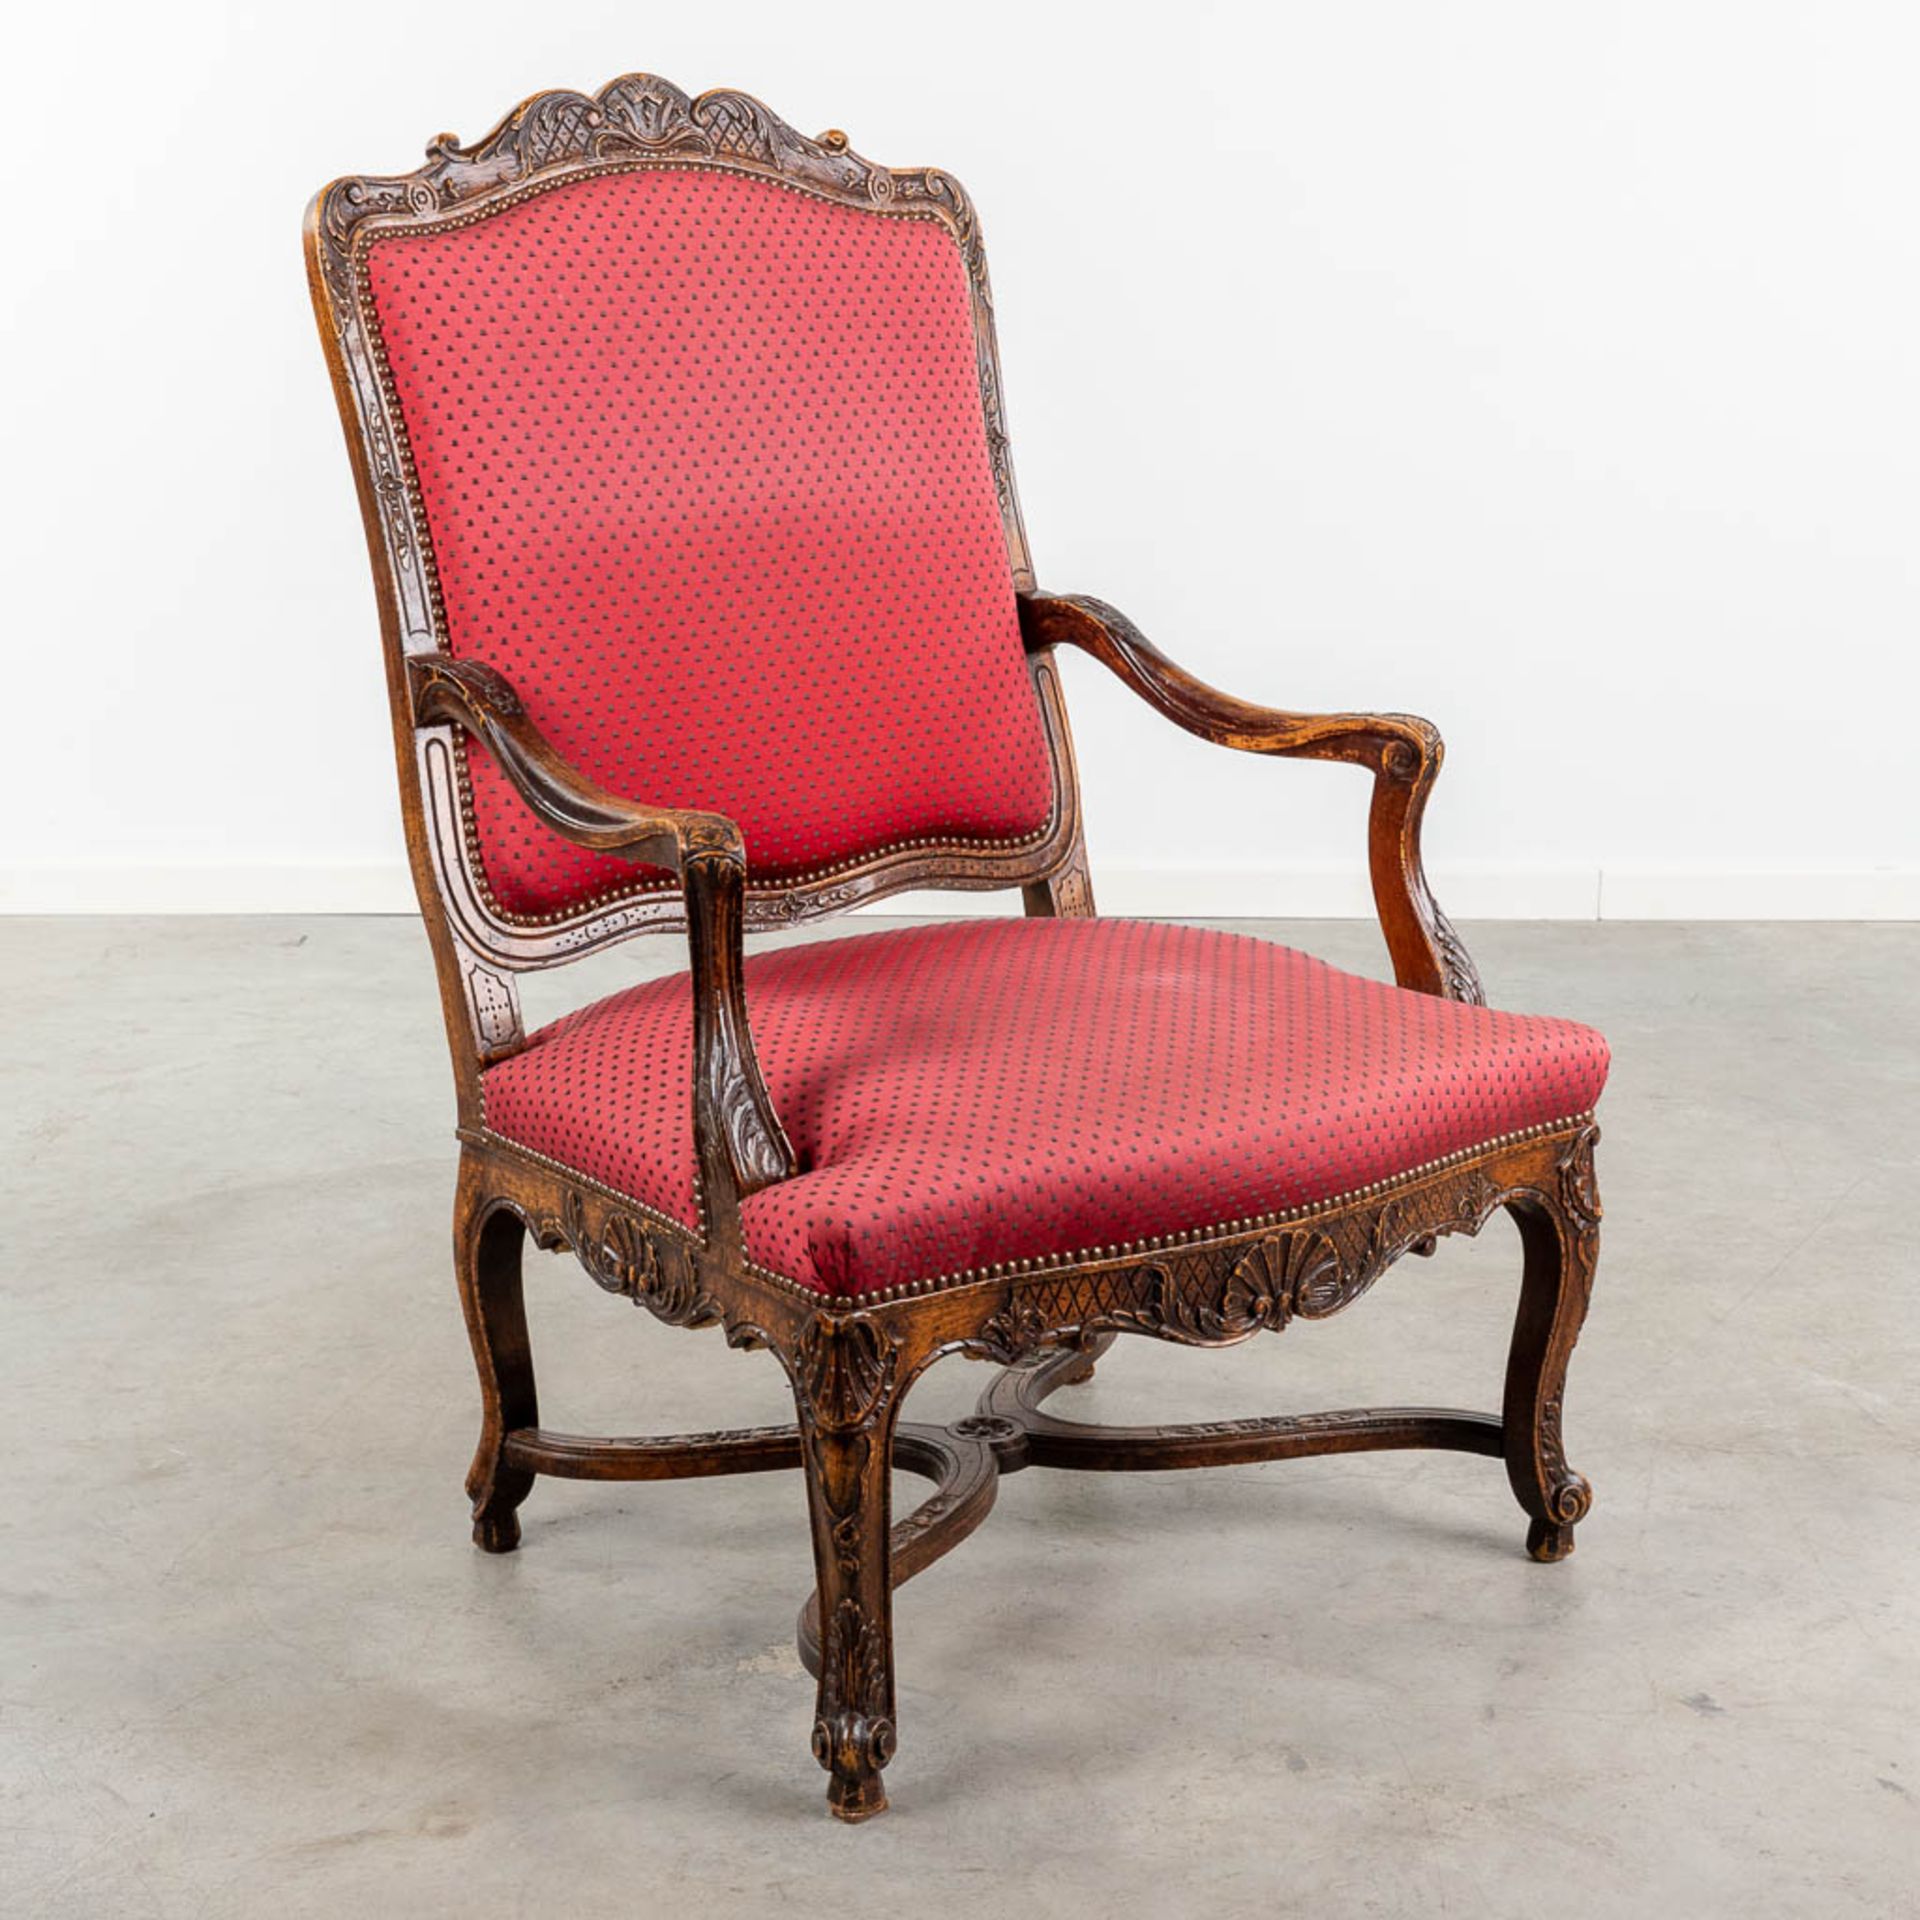 An armchair finished with red fabric and wood sculptures in Louis XV style. (L:73 x W:72 x H:108 cm